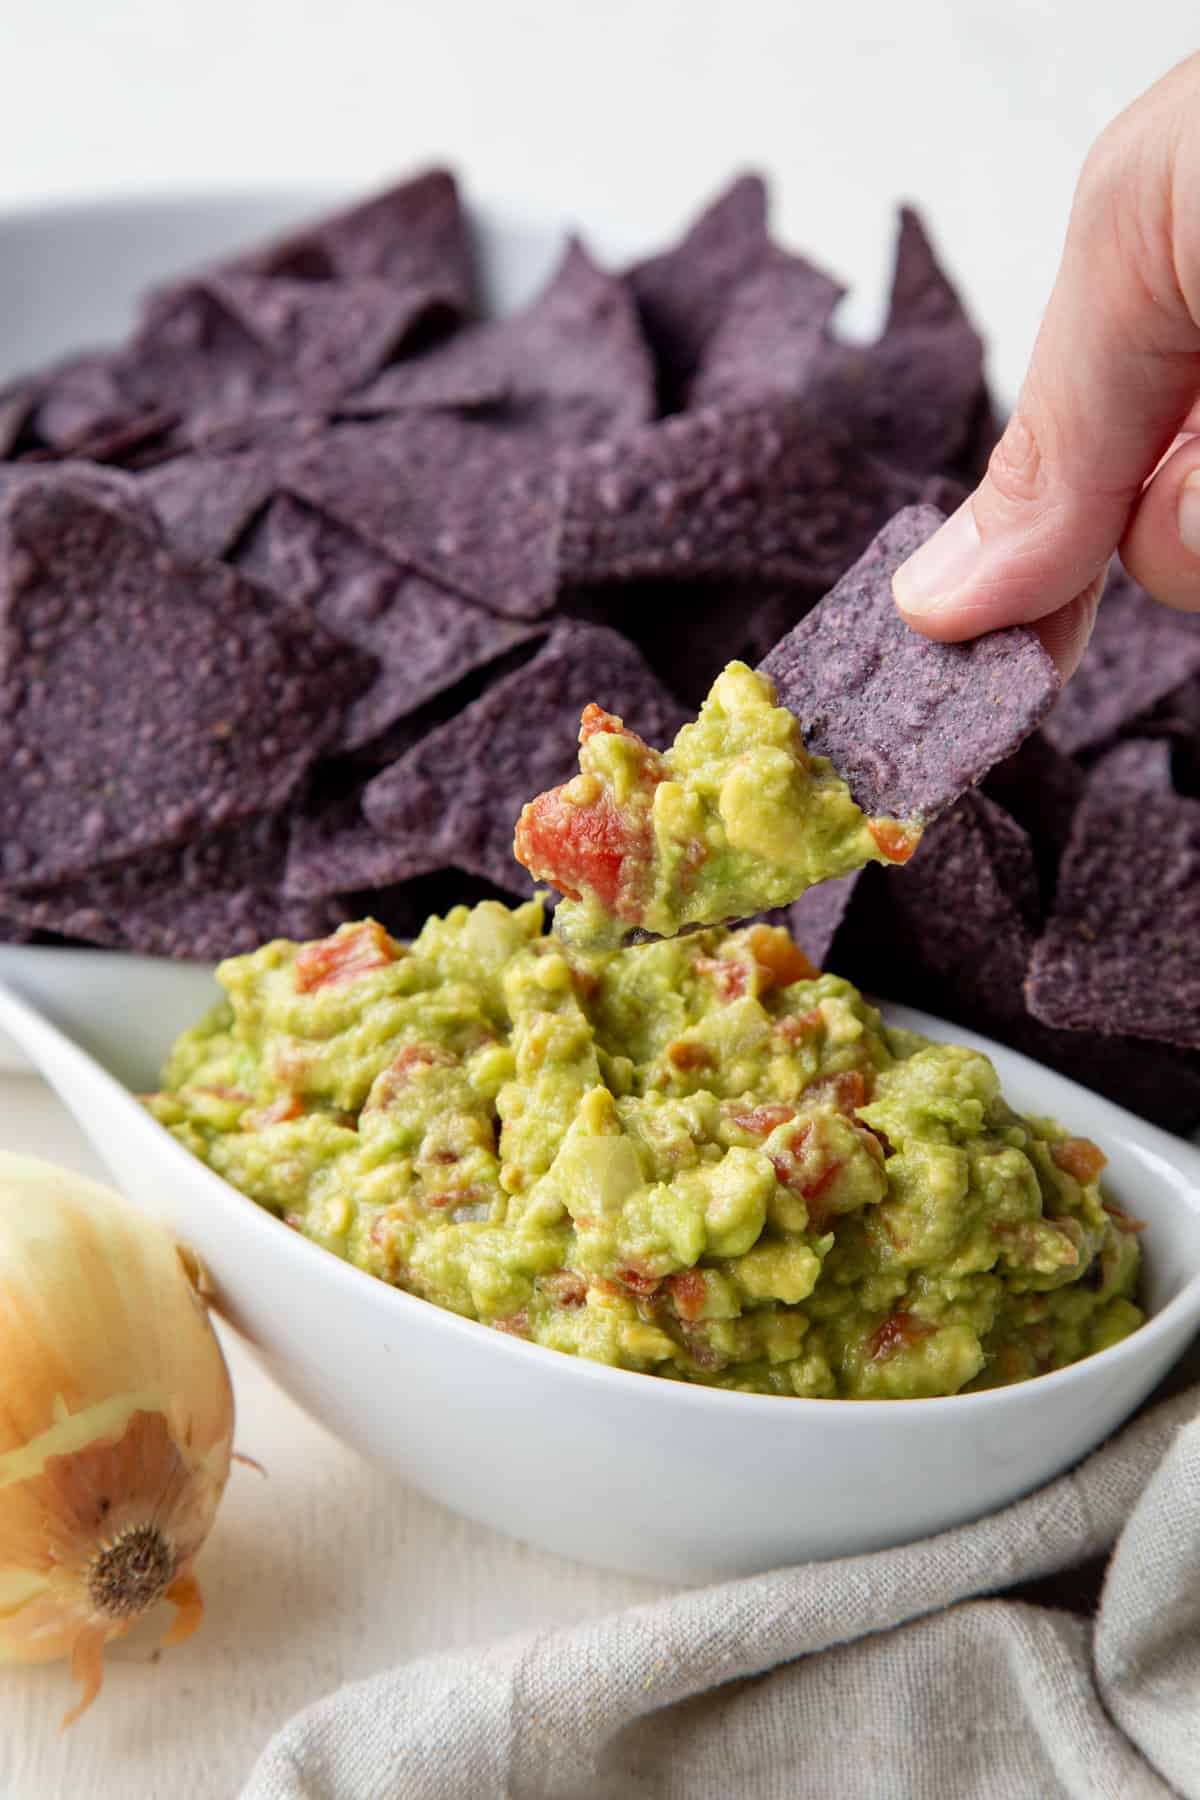 Hand lifting a blue corn tortilla chip from a bowl with Rotel Guacamole on it.